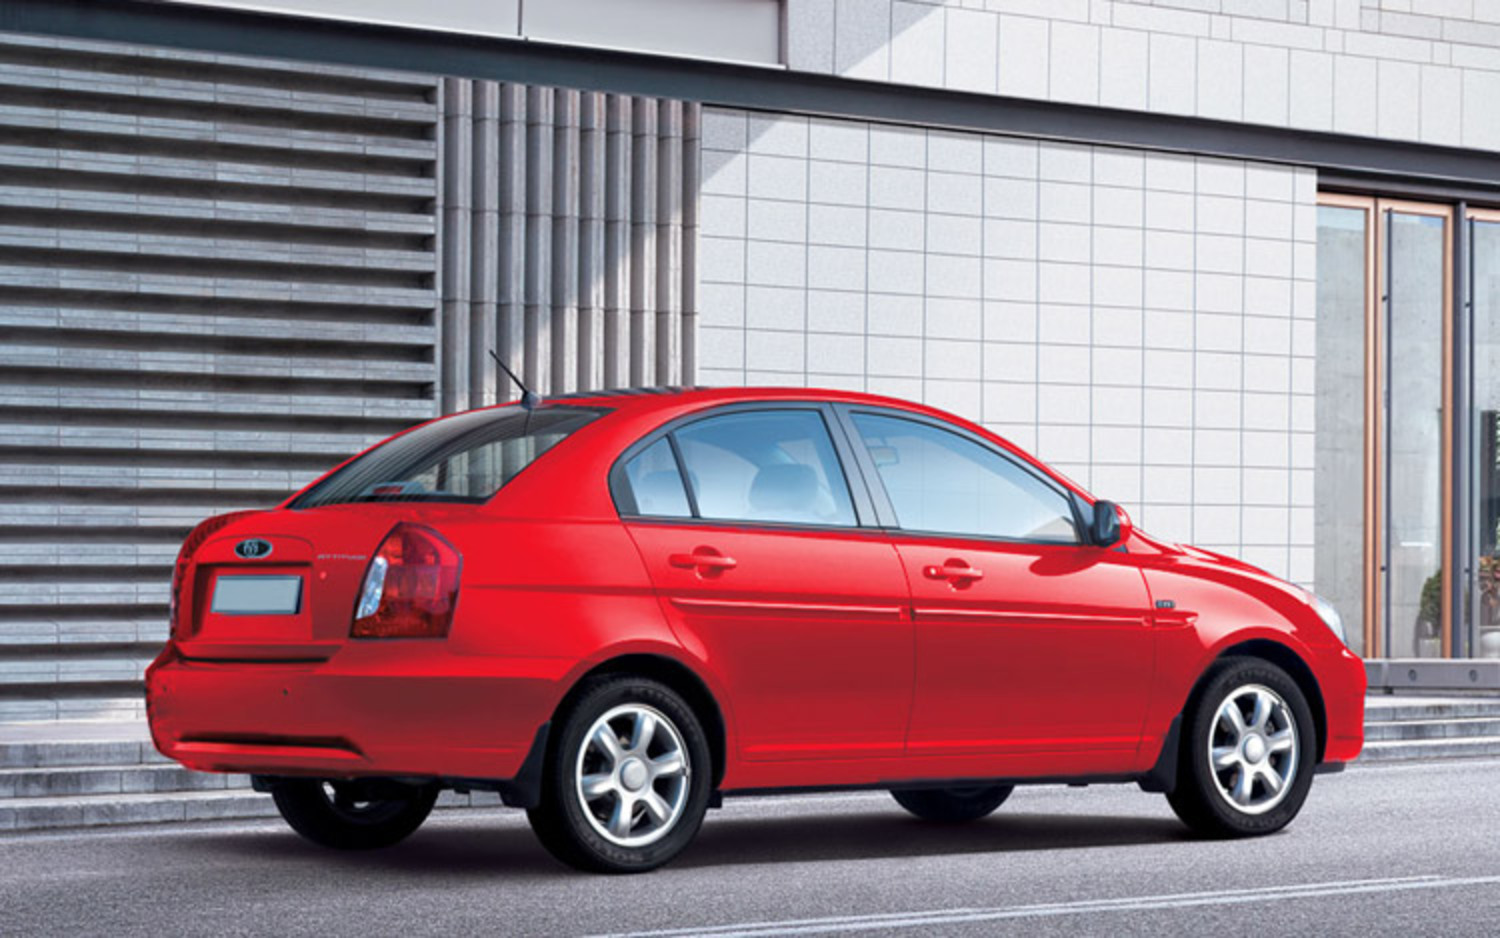 Foreign Exchange: Dodge Attitude â€” Mexico's Version of the Hyundai Accent